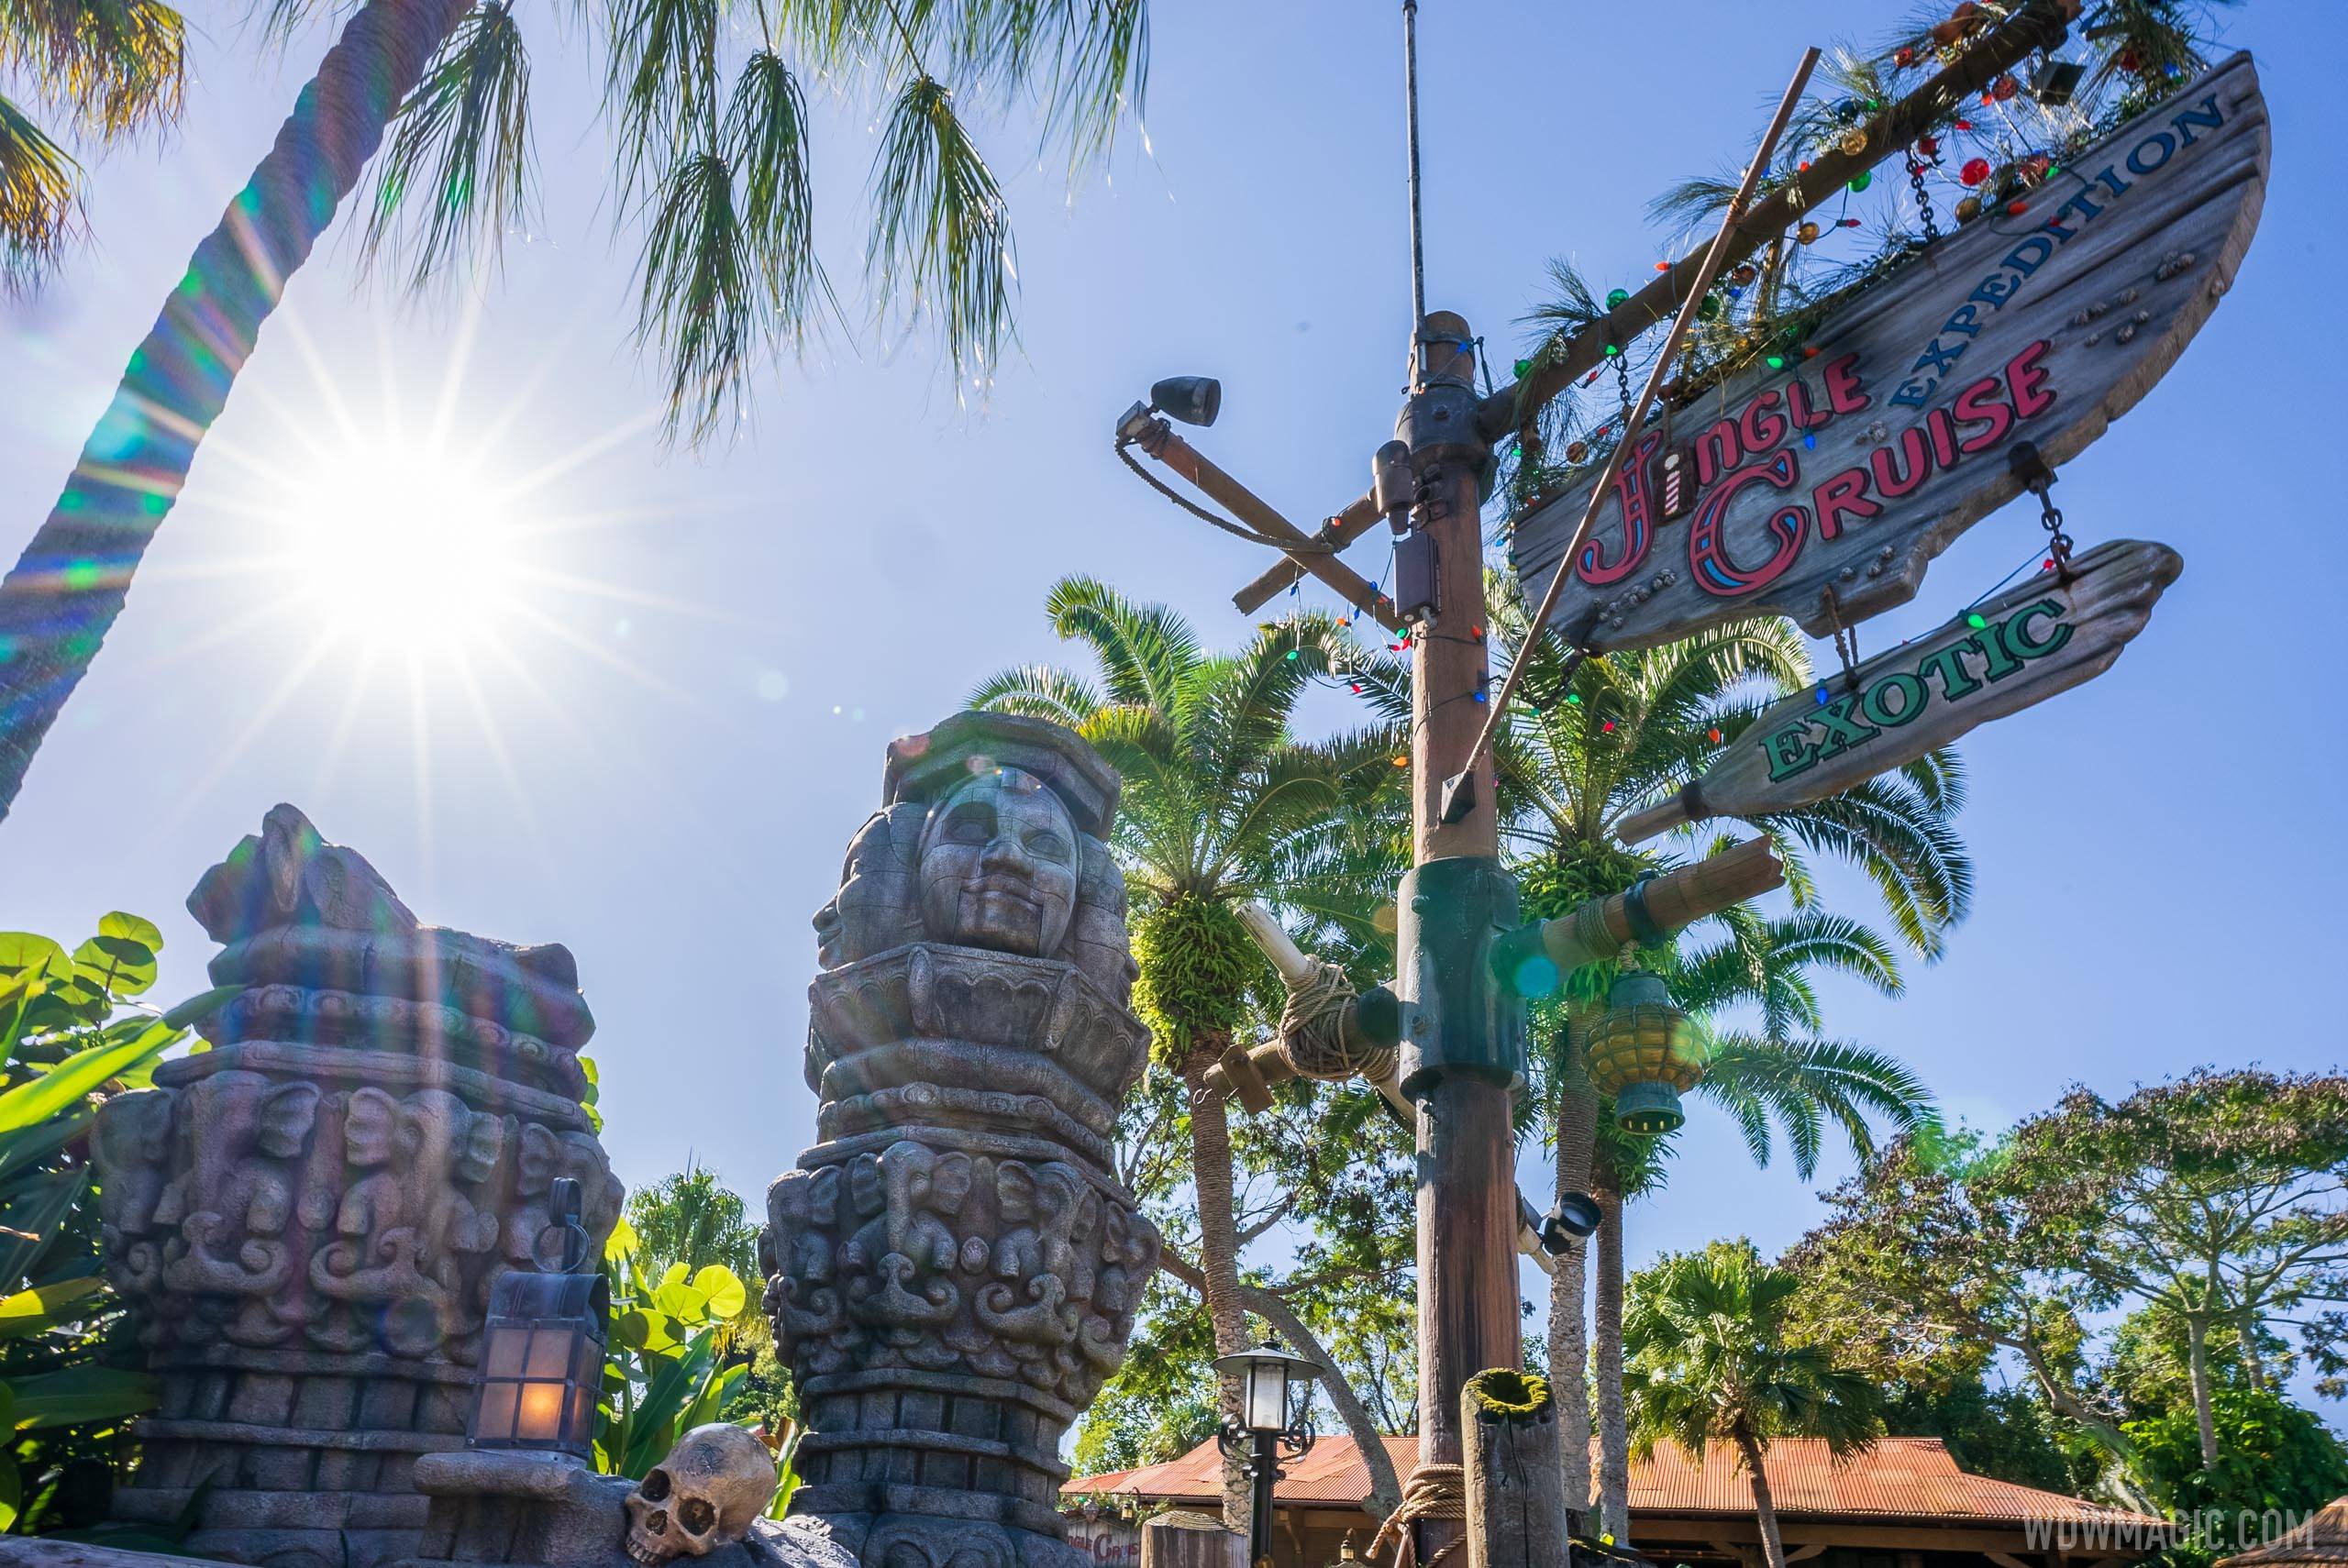 Disney's Jungle Cruise gets a Holiday makeover with Jingle Cruise, opening November 3